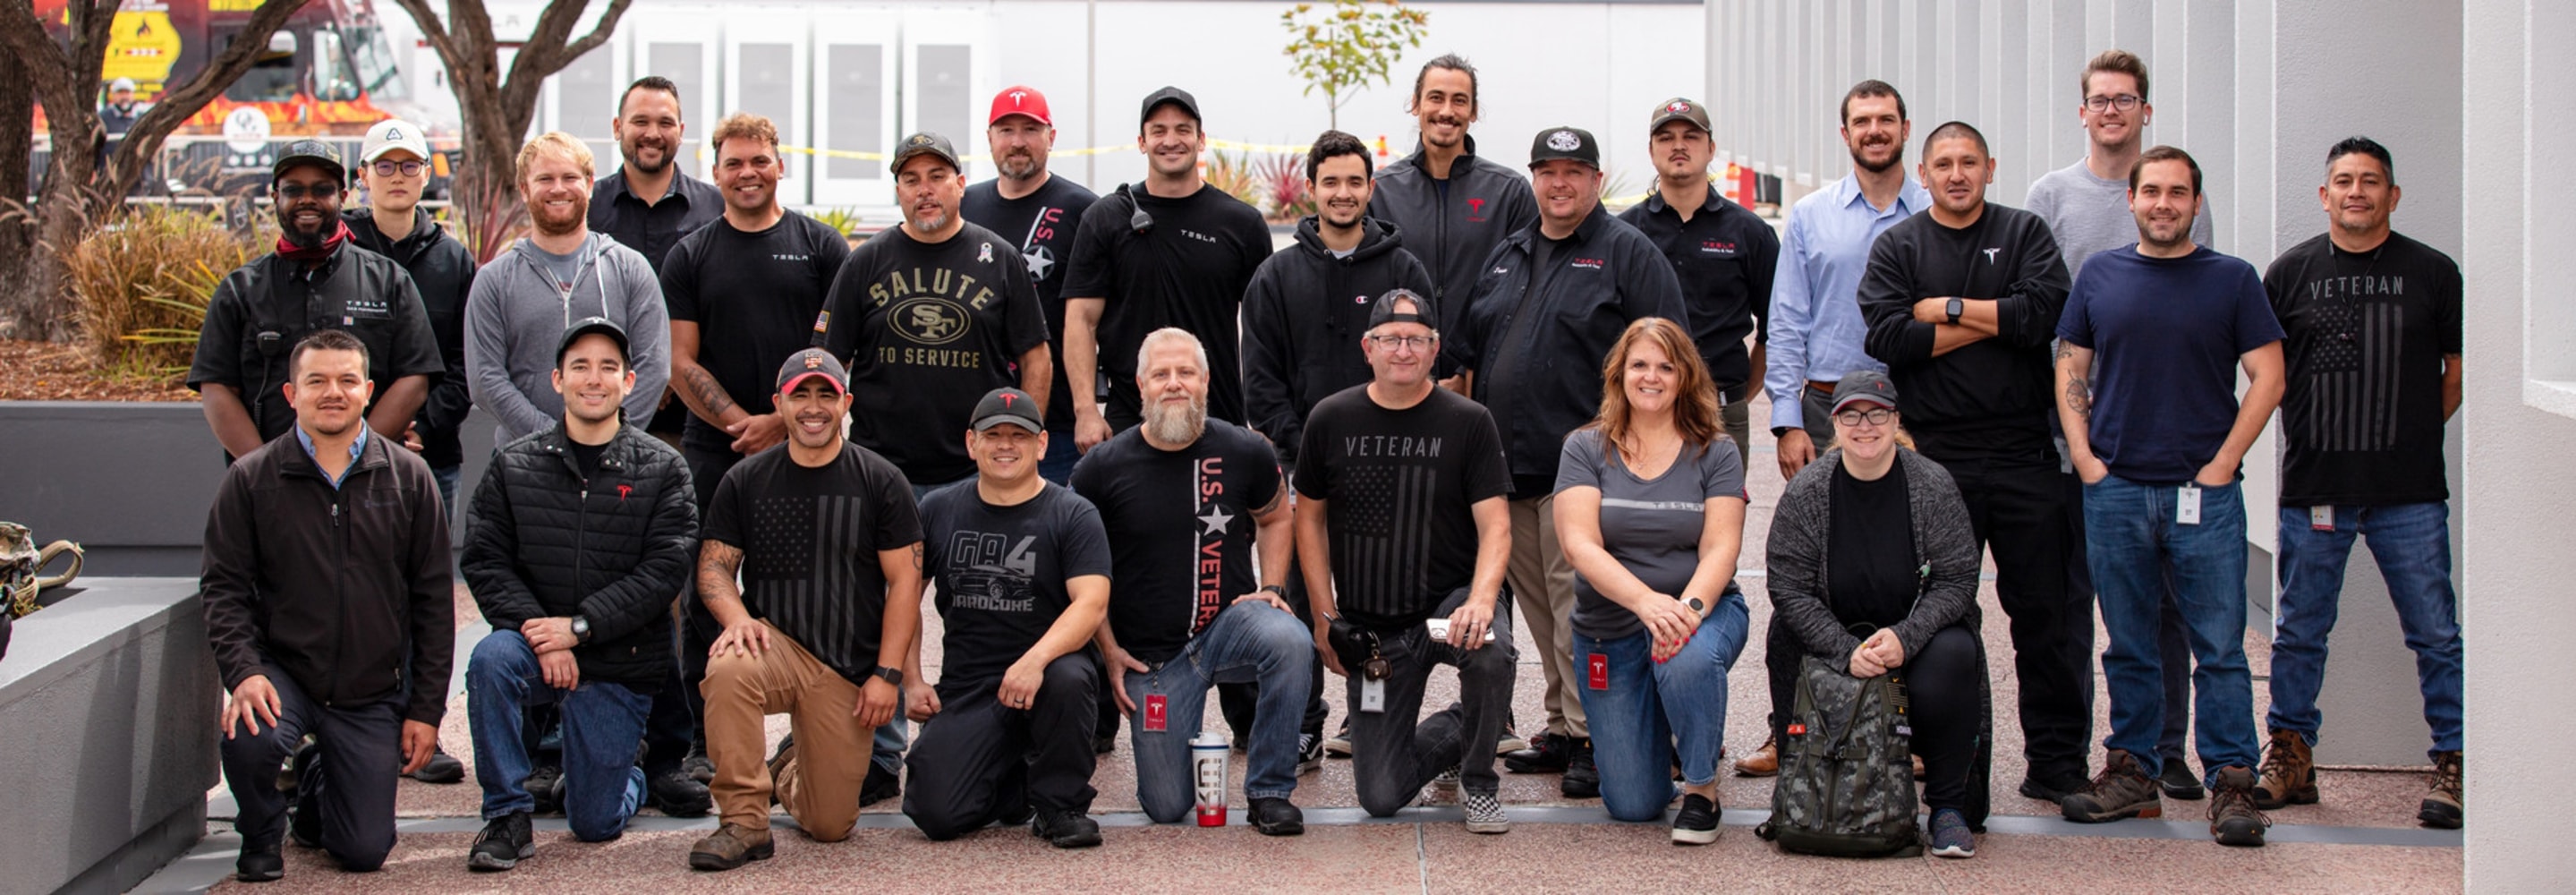 Tesla employees who are all Veterans group photo